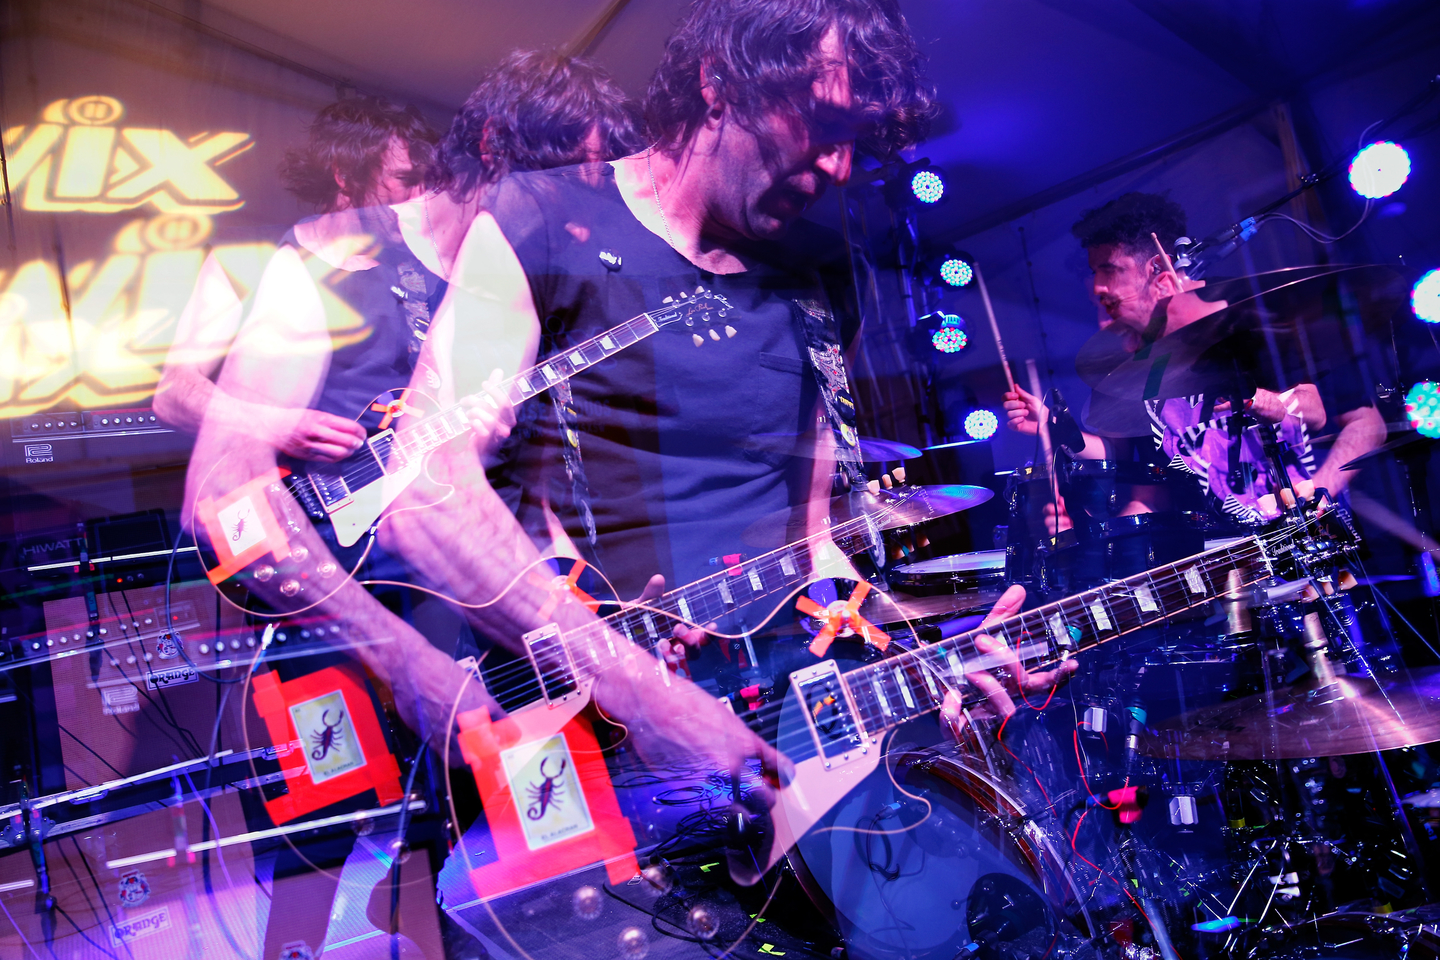 Japandroids were part of the House of Duos @ Lustre Pearl Presented by TWIX® showcase on Wednesday night. Photo by Steve Rogers Photography/Getty Images for SXSW